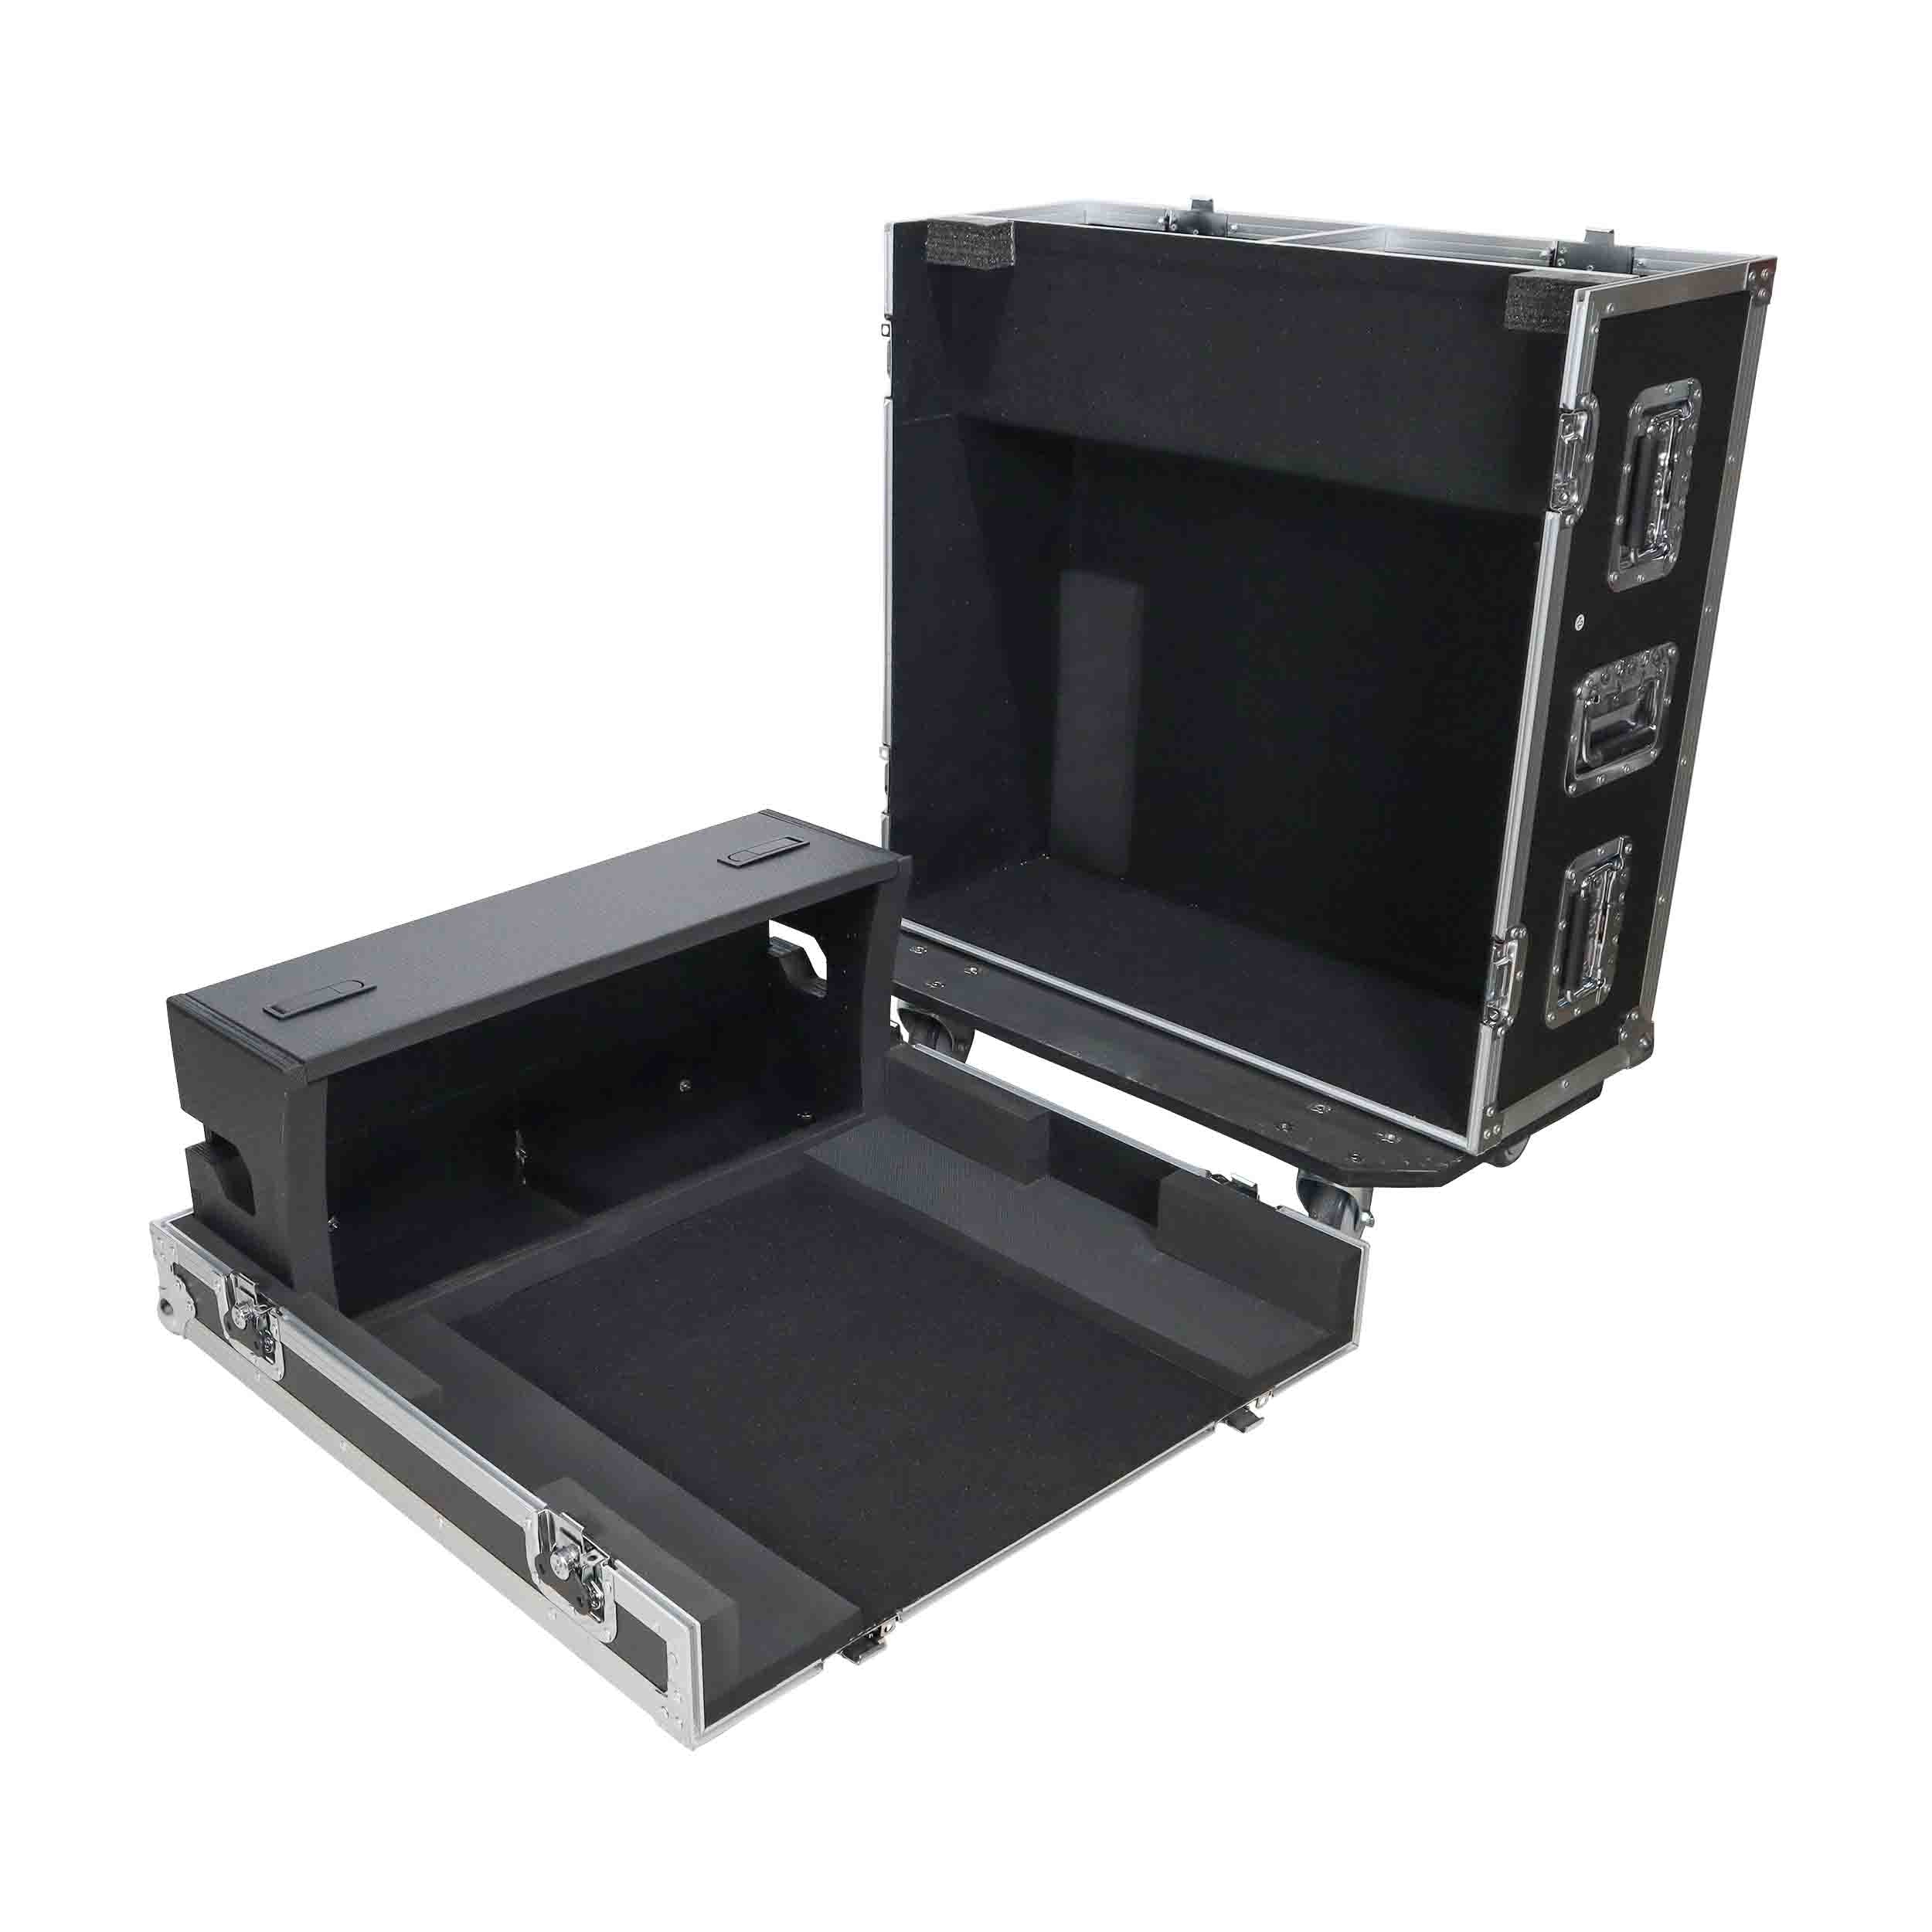 ProX XS-YDM7COMPACTEXDHW, ATA Digital Audio Mixer Flight Case for Yamaha DM7 Compact Extension Console by ProX Cases